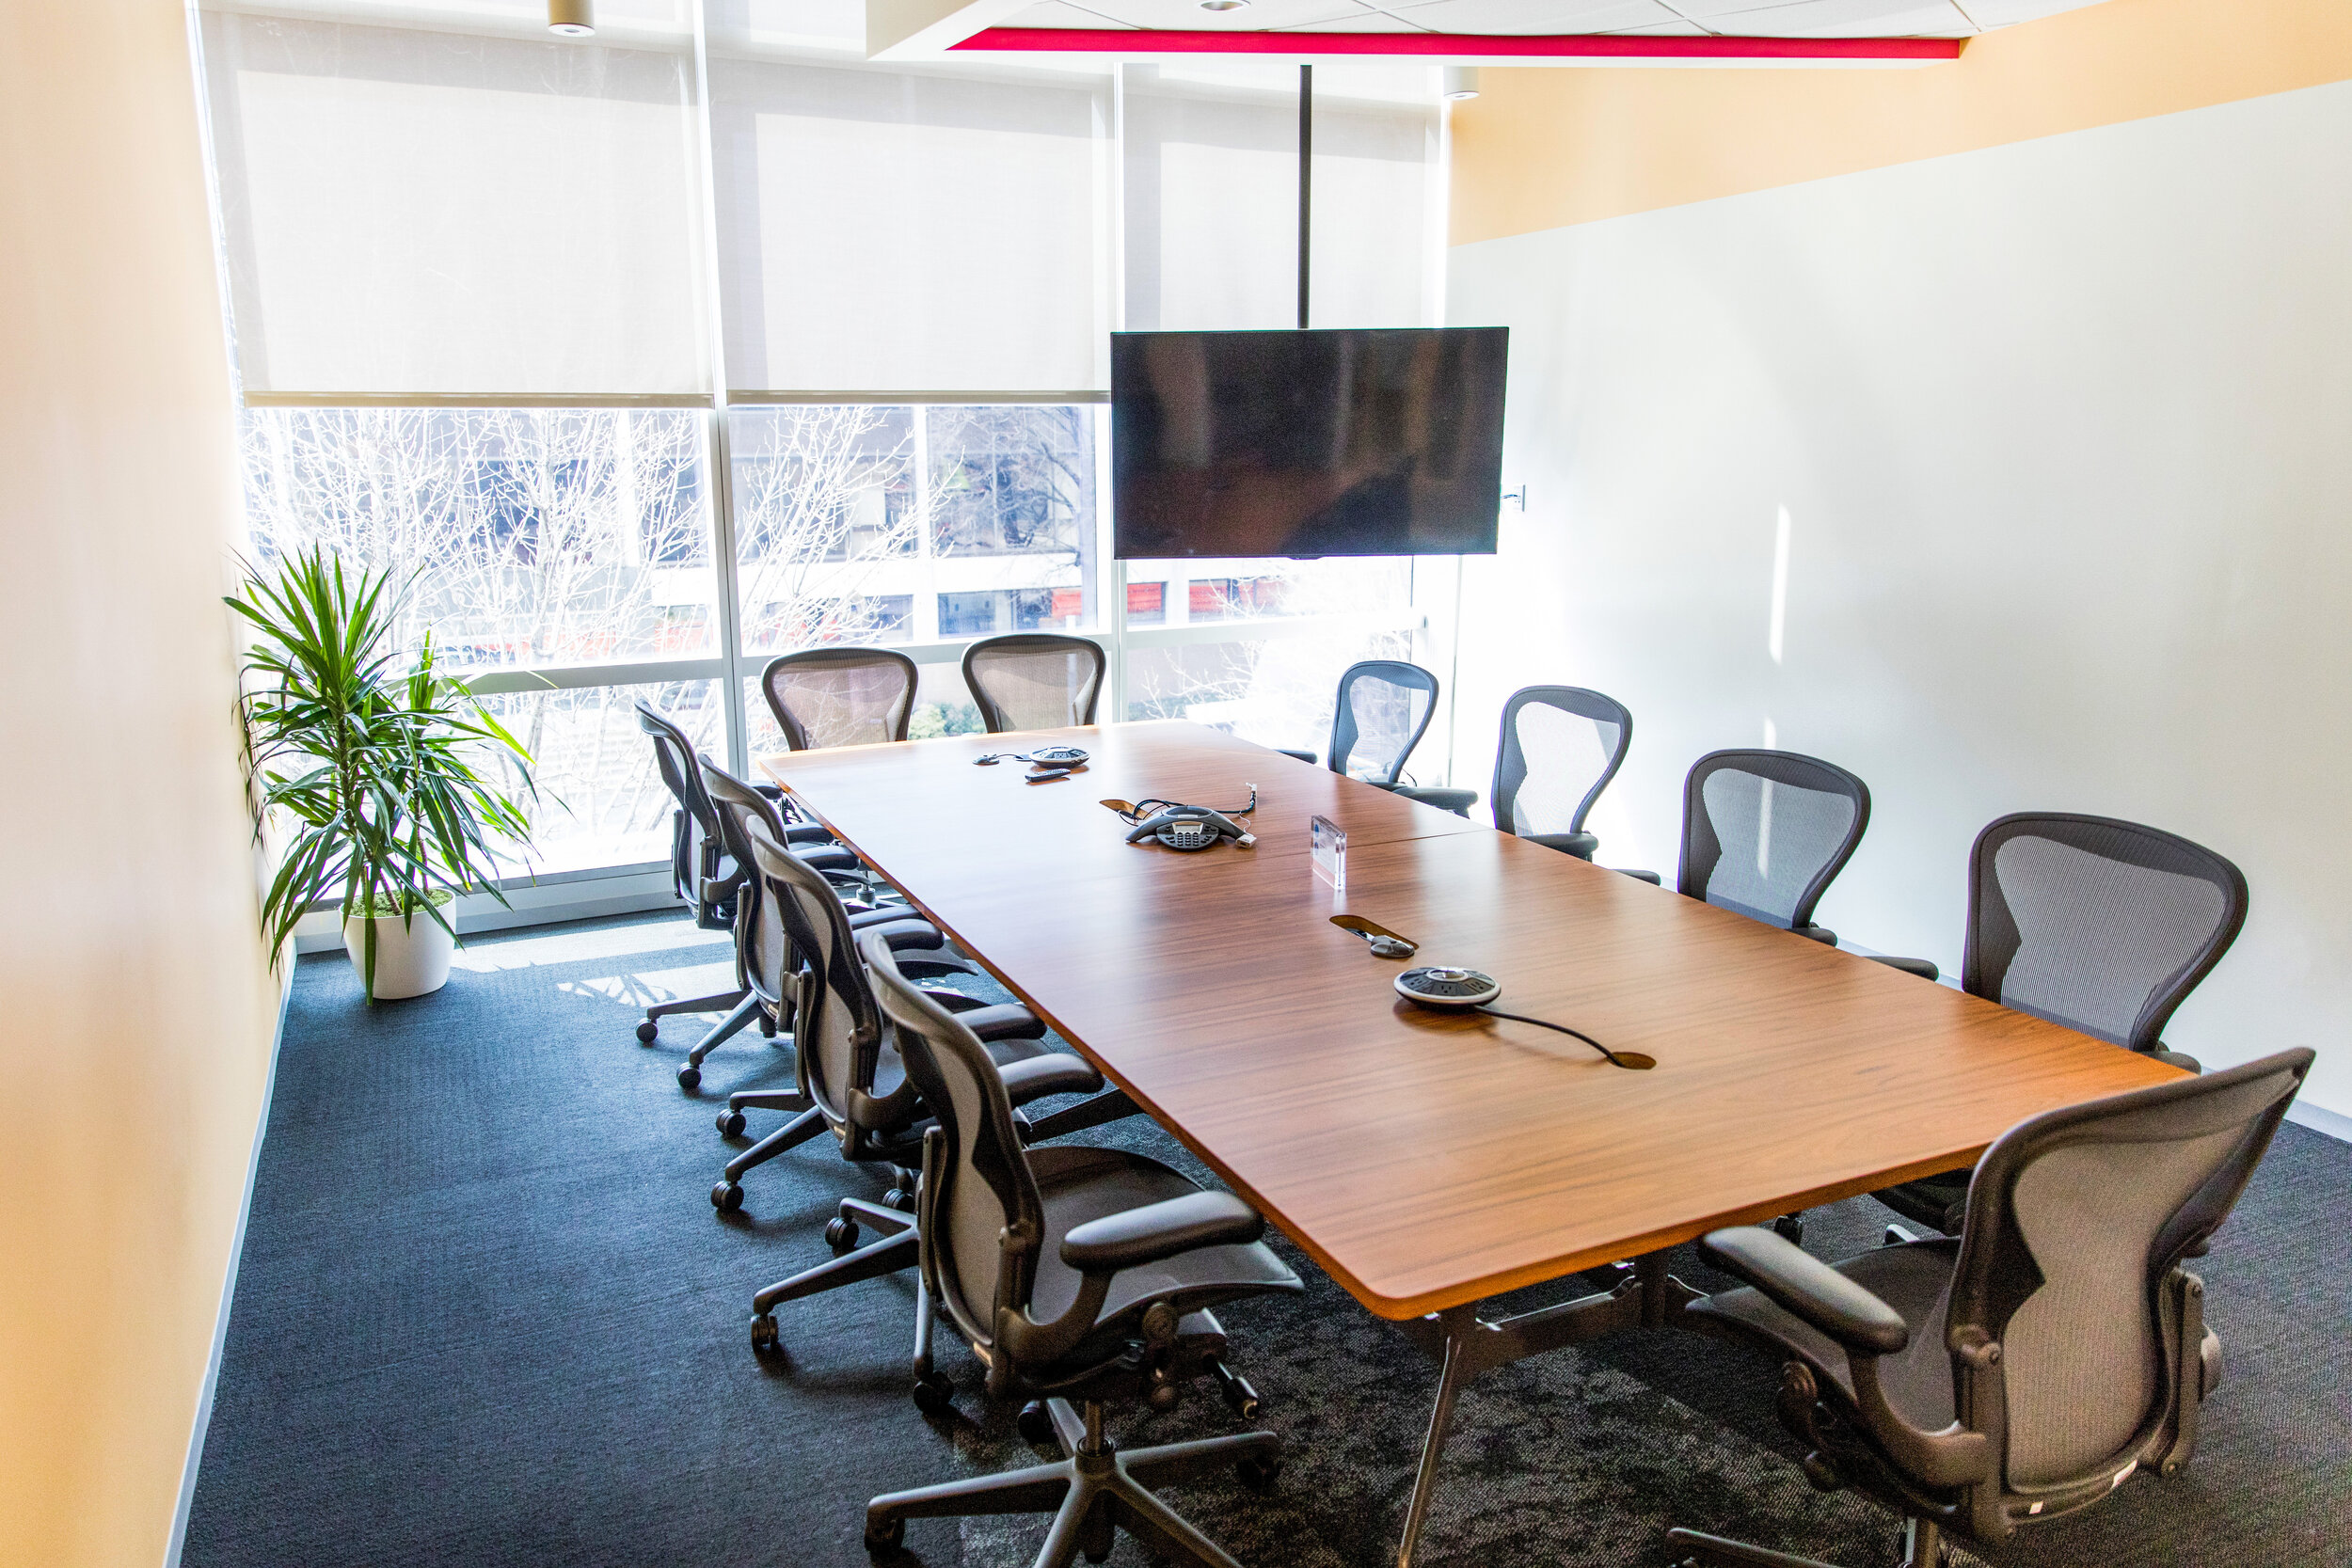 A conference room at CIC, equipped with video conferencing technologies.